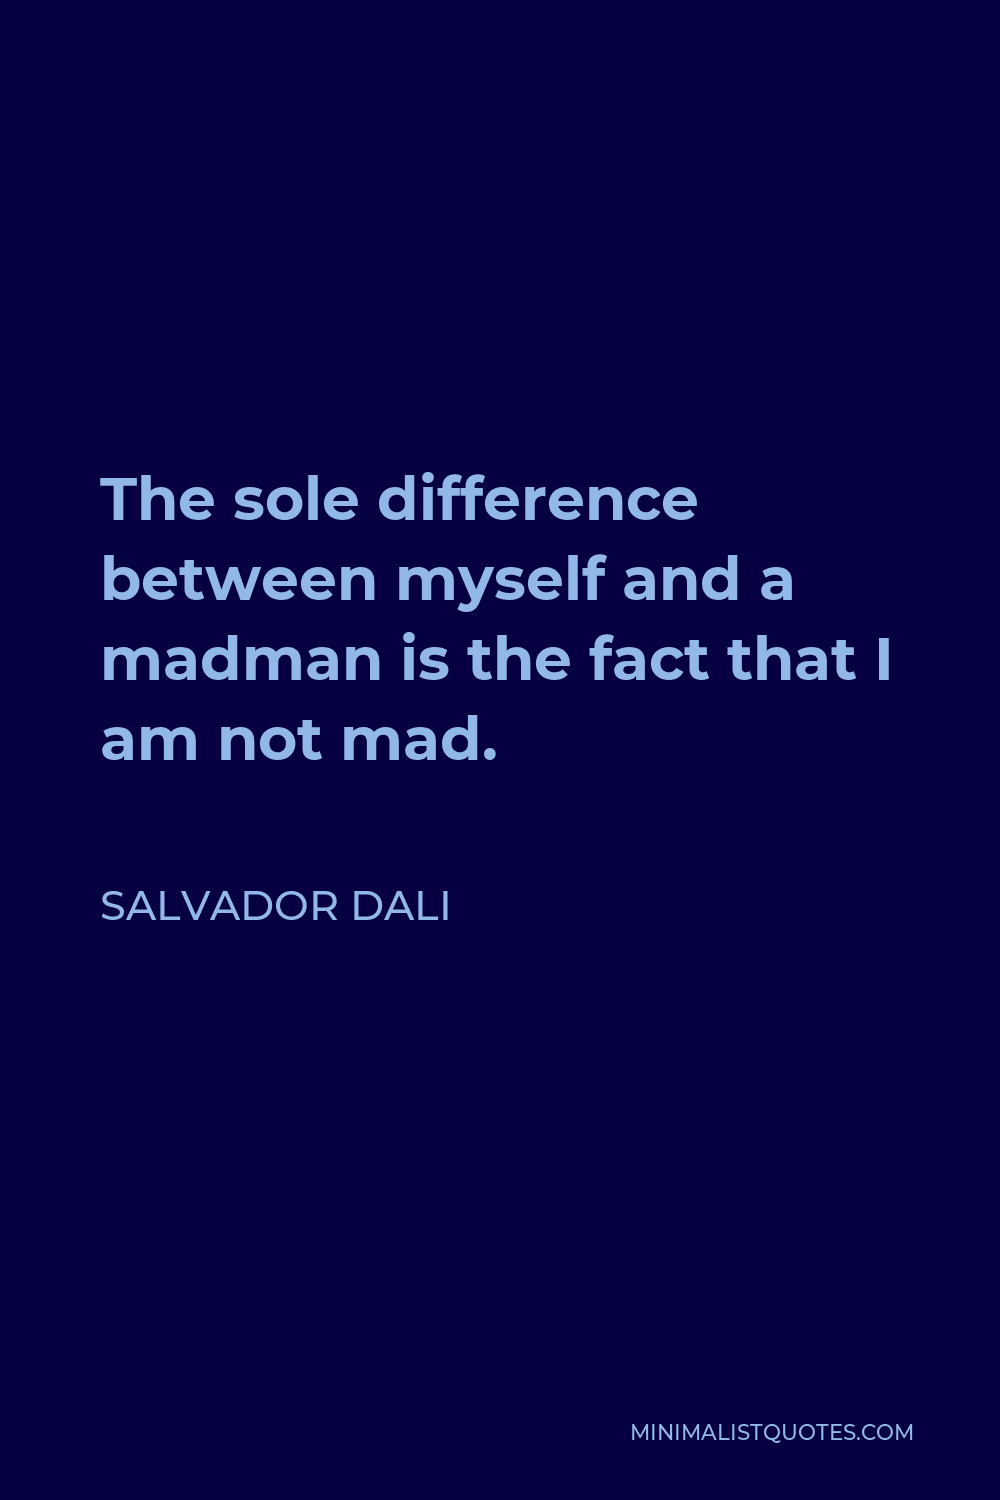 Salvador Dali Quote - The sole difference between myself and a madman is the fact that I am not mad.